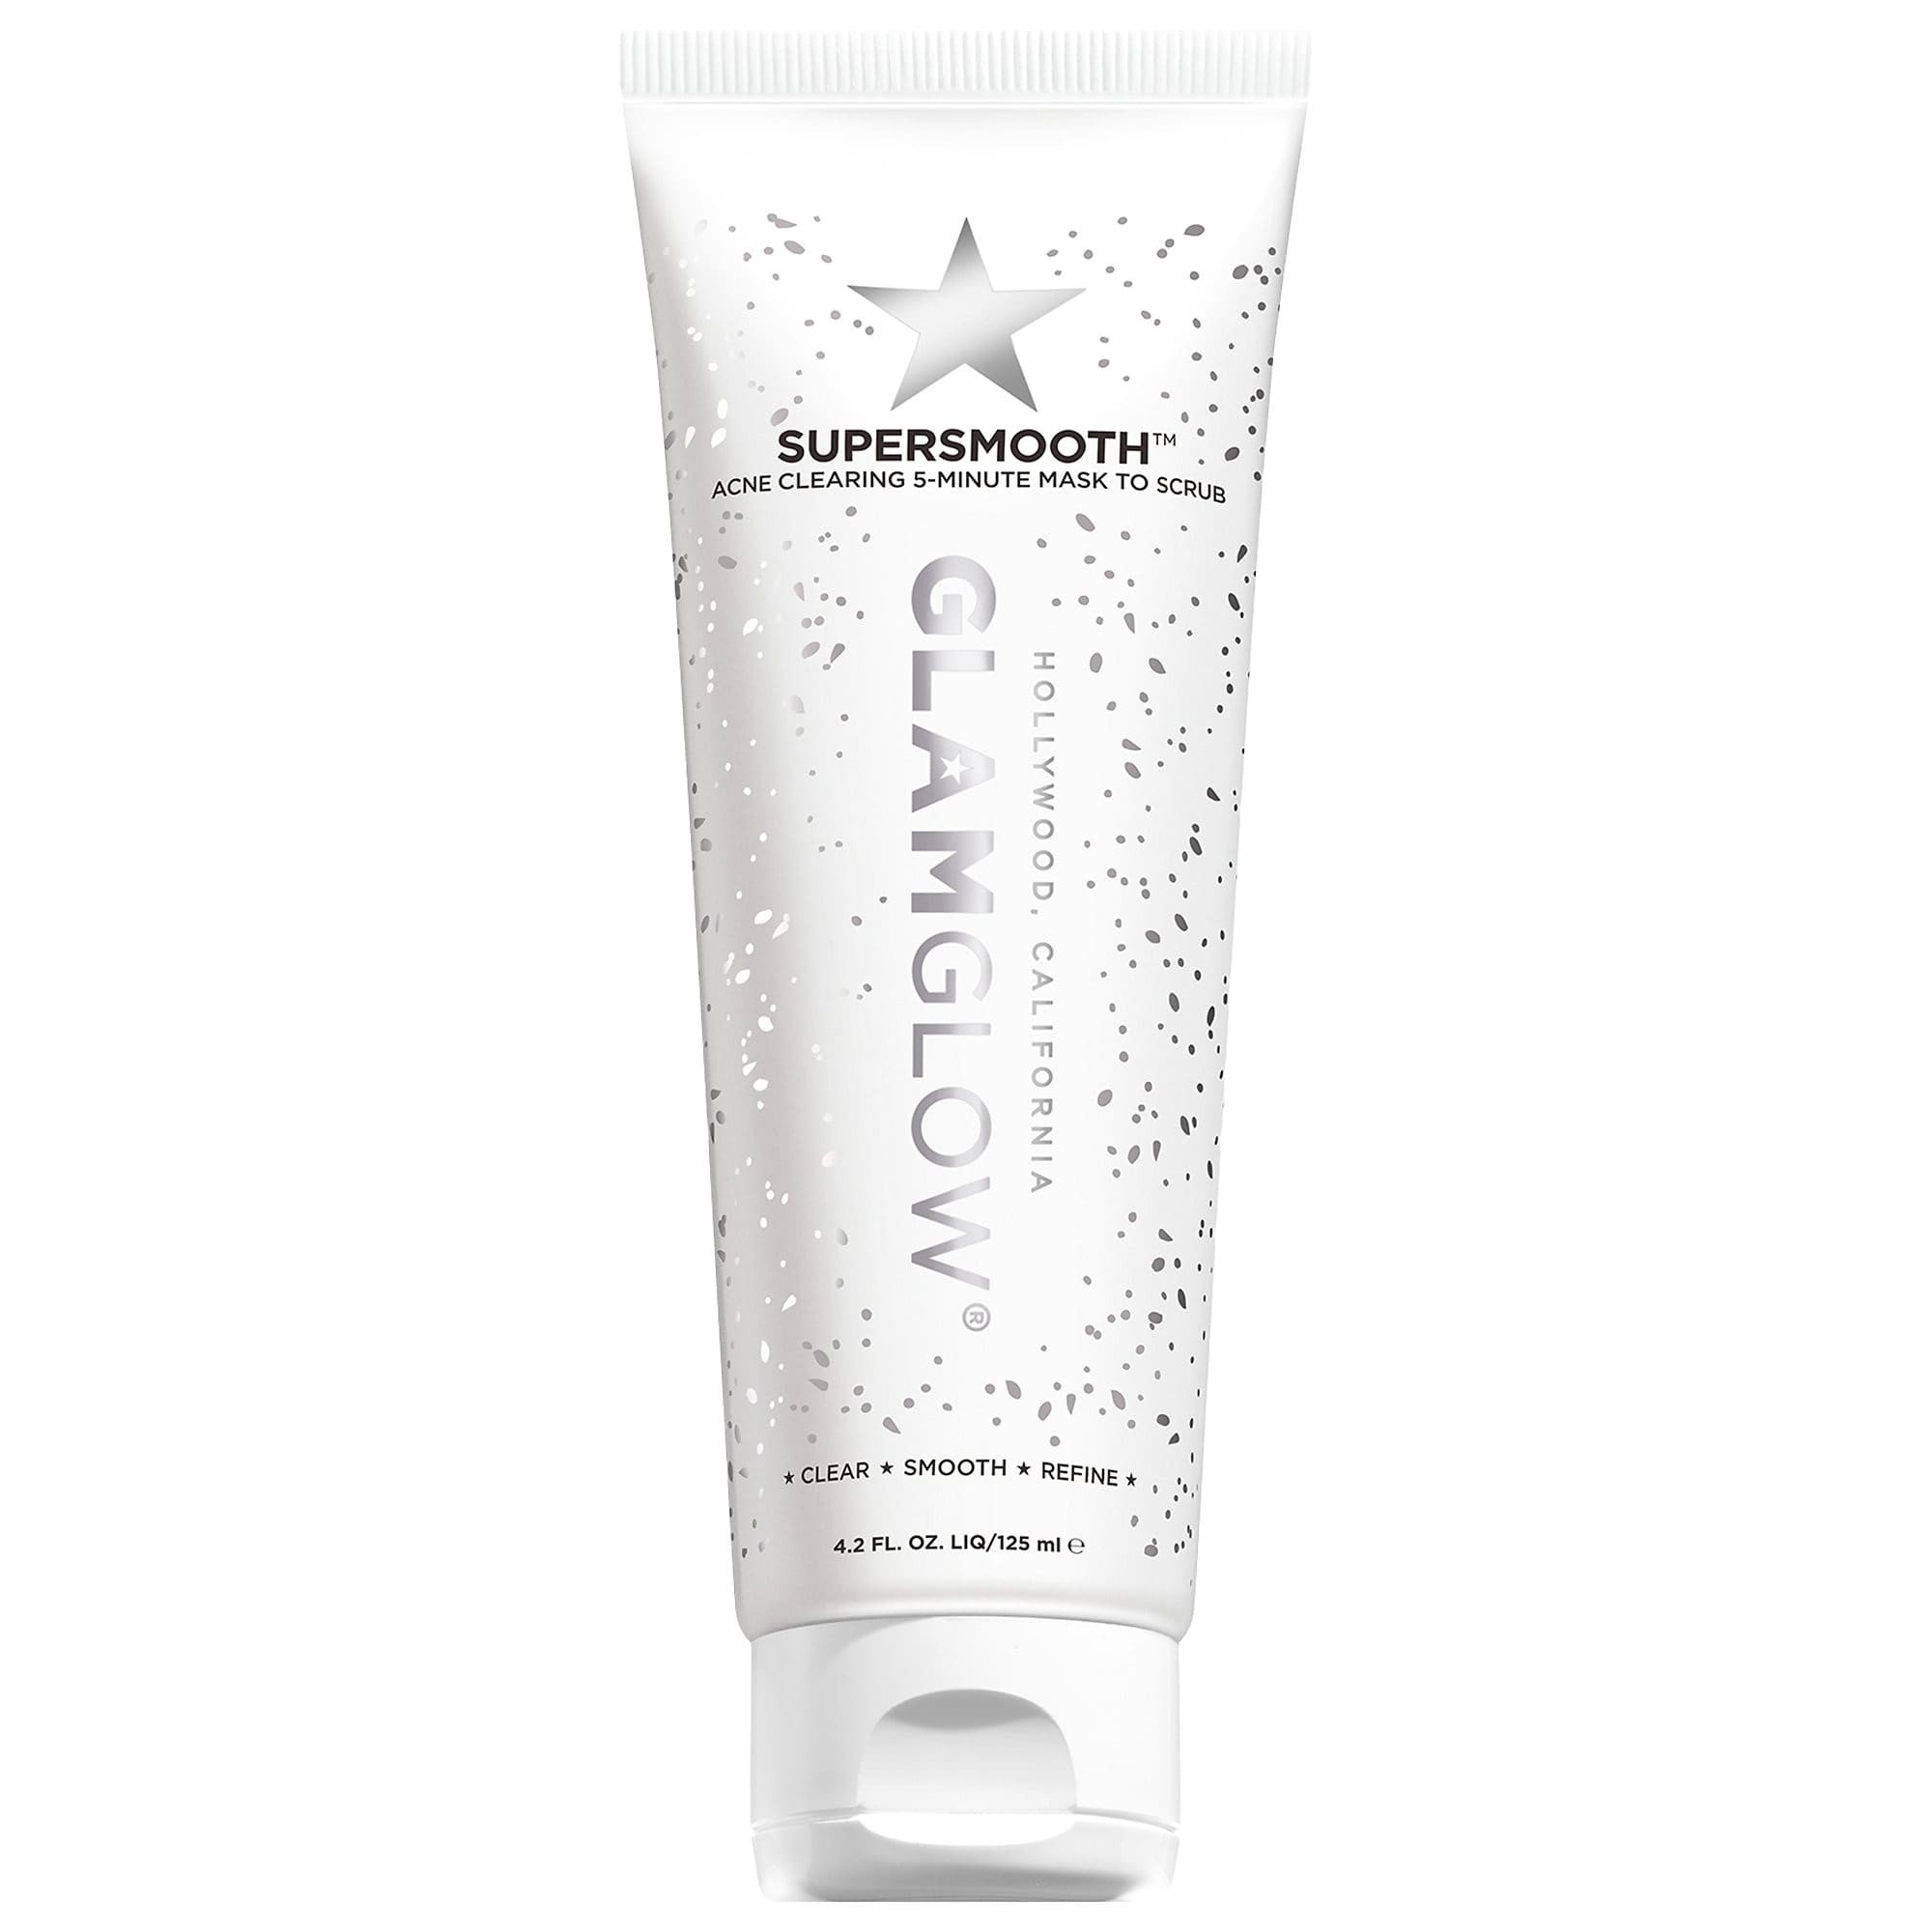 Glamglow Supersmooth Acne Clearing Mask to Scrub